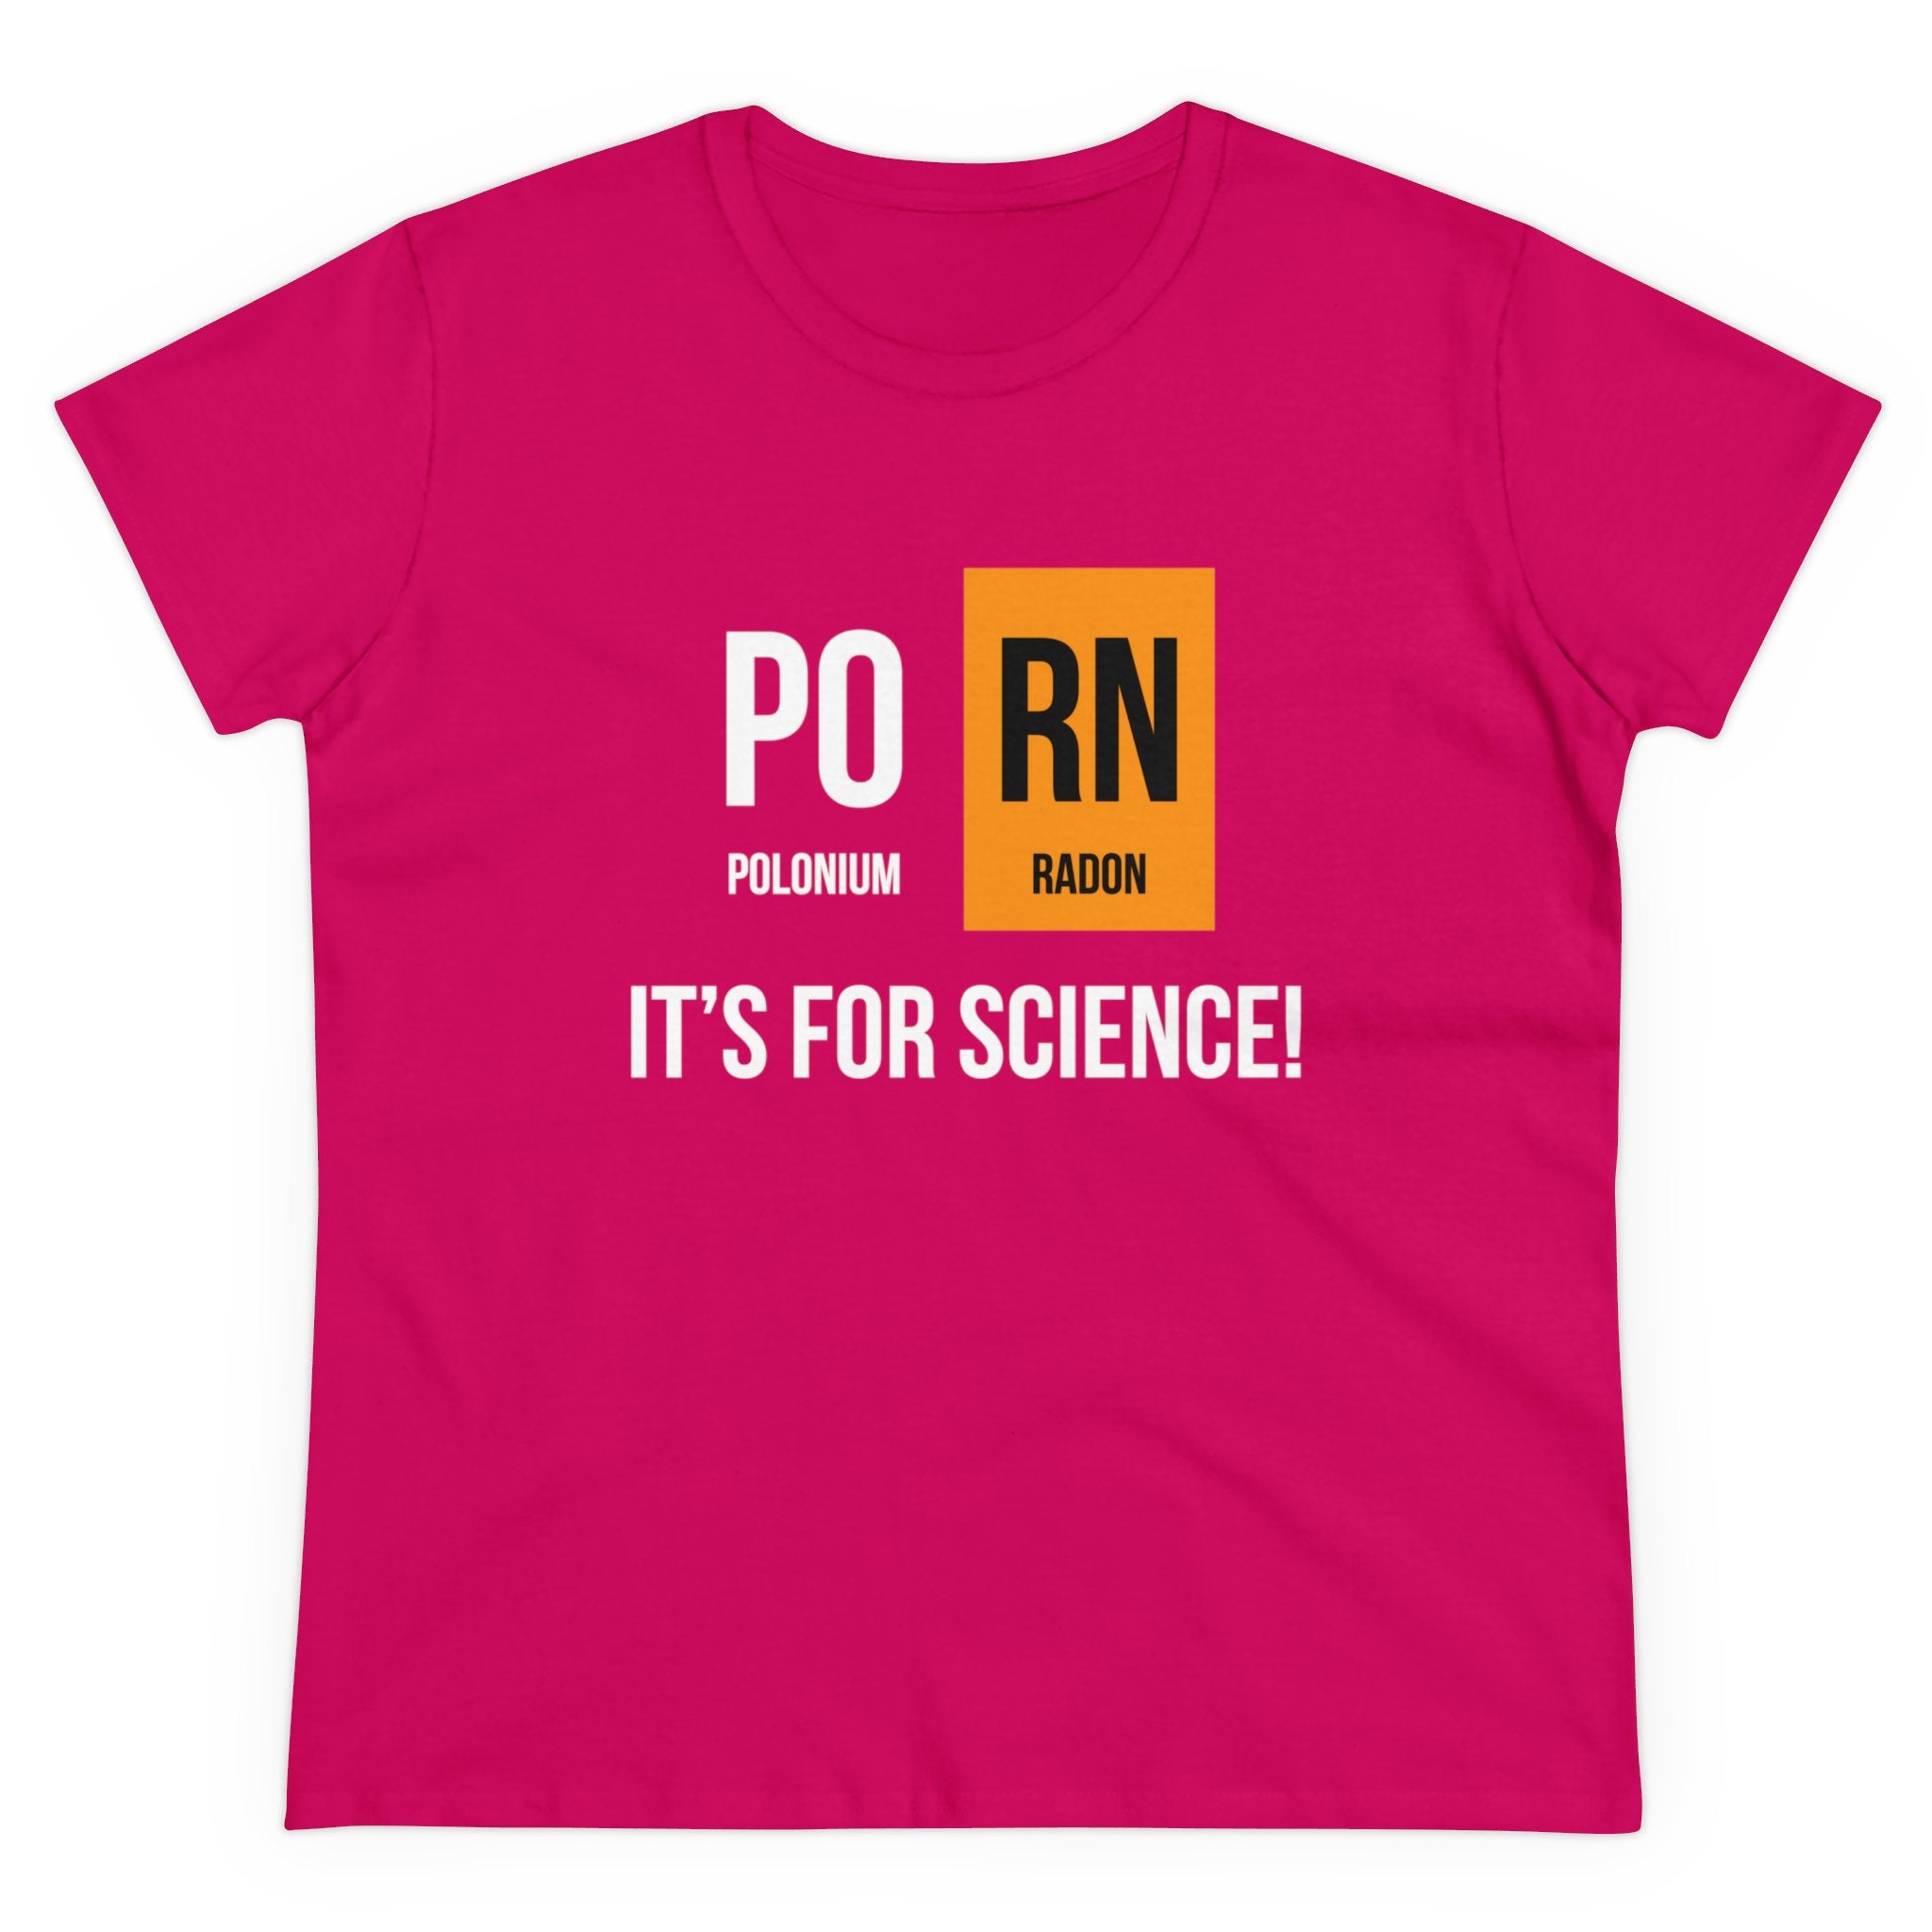 A bright pink cotton PO-RN - Women's Tee featuring the PO-RN Design in large text, referencing the elements Polonium and Radon from the periodic table, with the caption "It's for science!" underneath.